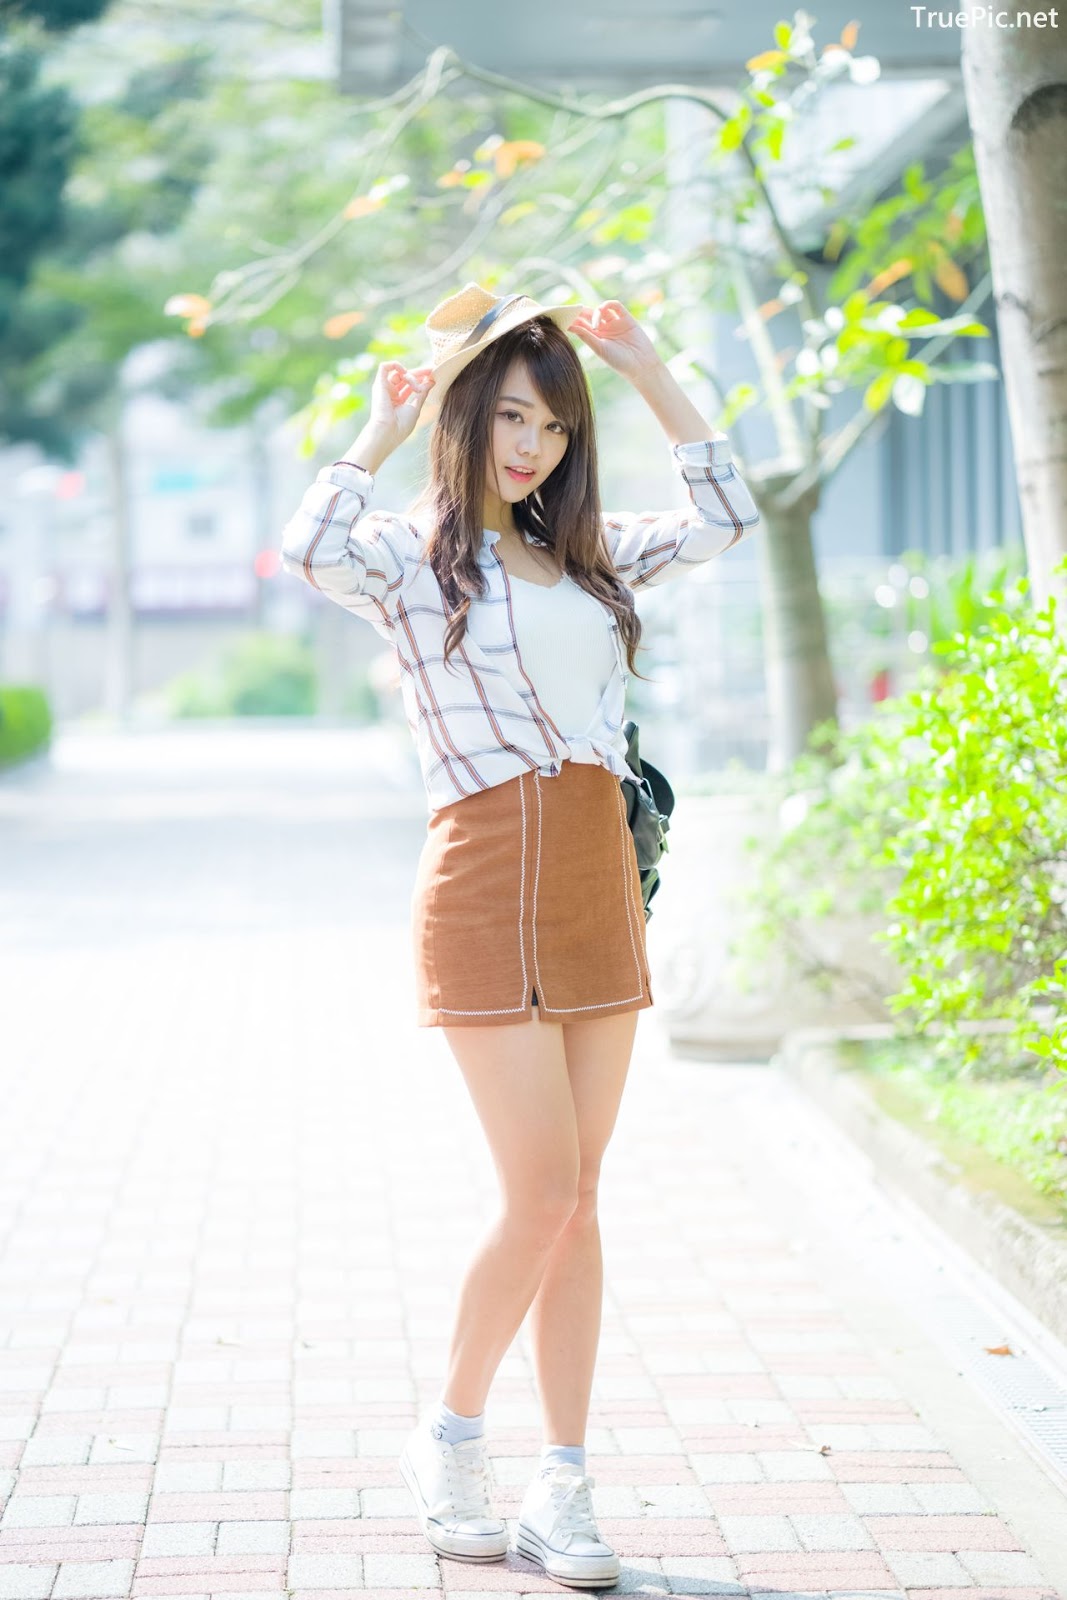 Image-Taiwan-Social-Celebrity-Sun-Hui-Tong-孫卉彤-A-Day-as-Student-Girl-TruePic.net- Picture-64